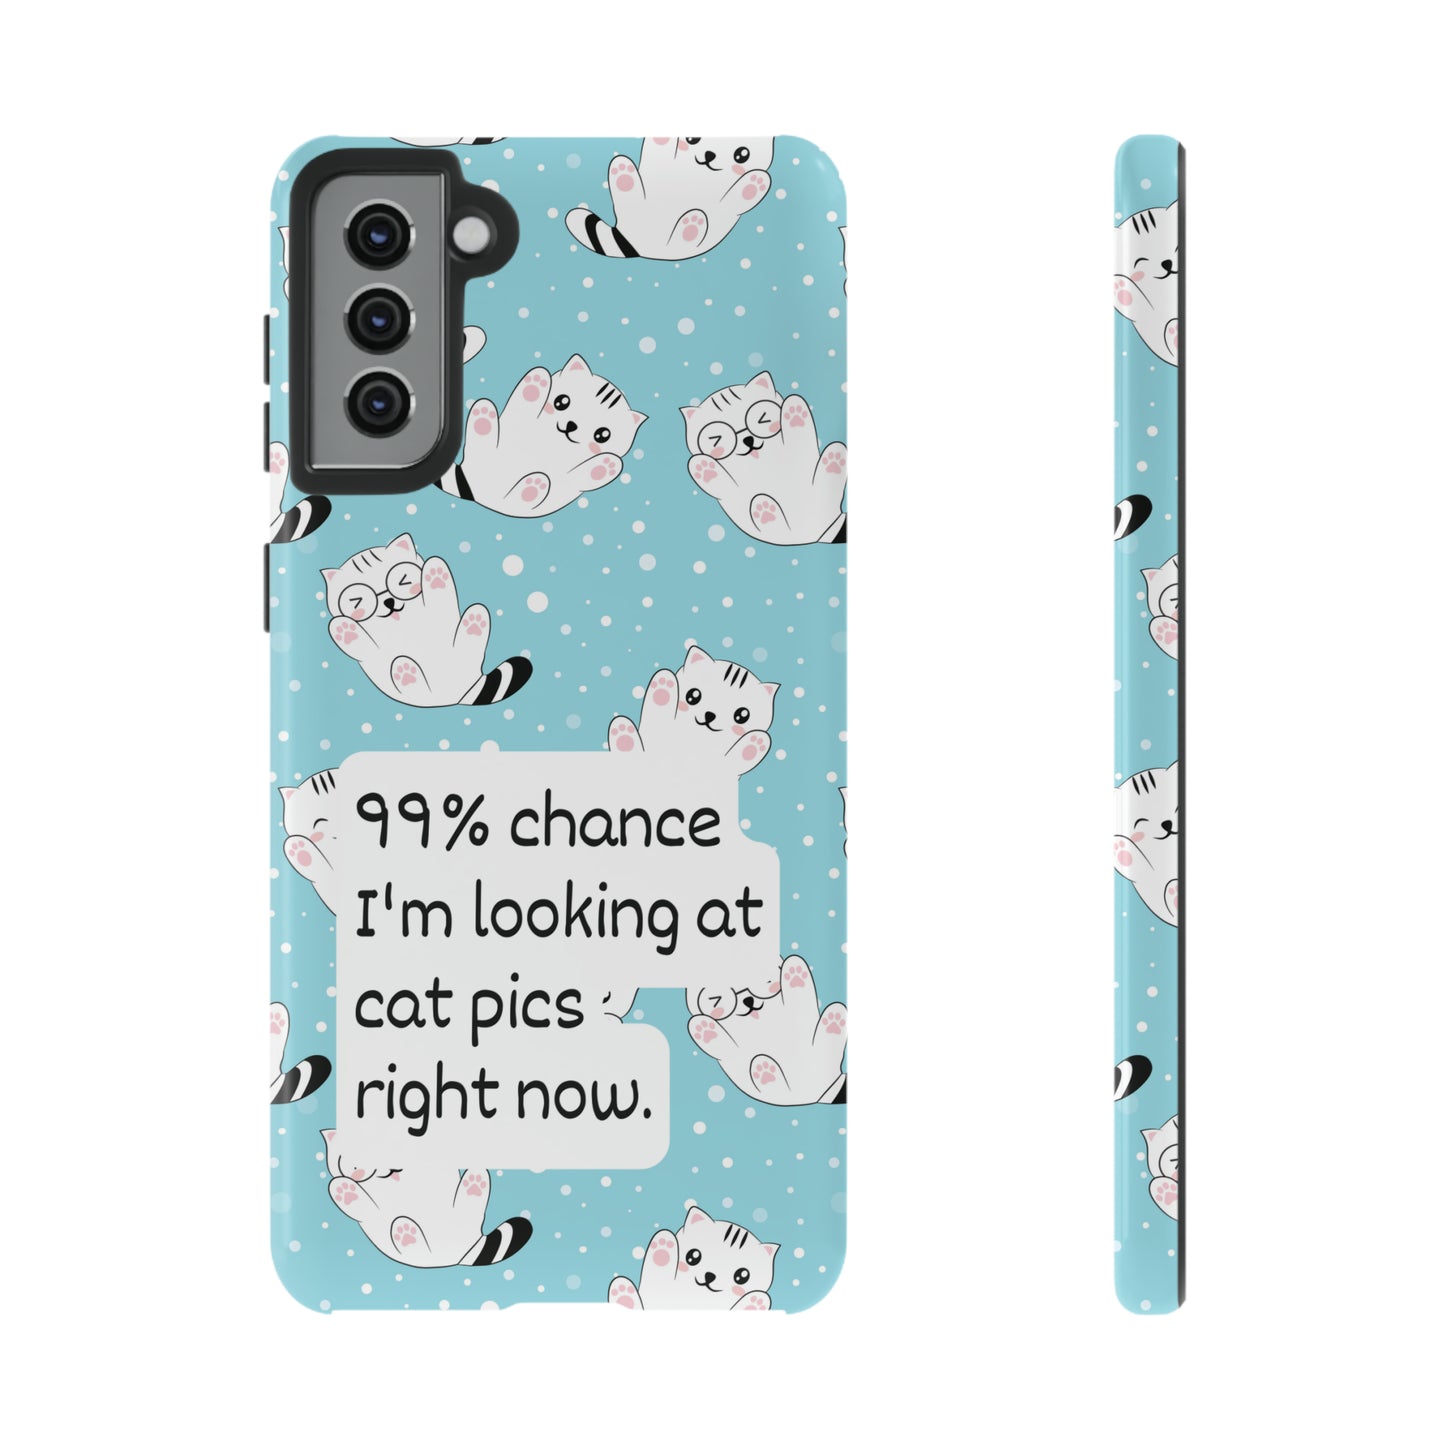 99% chance I'm looking at a 🐱 | Hardshell Phone Case